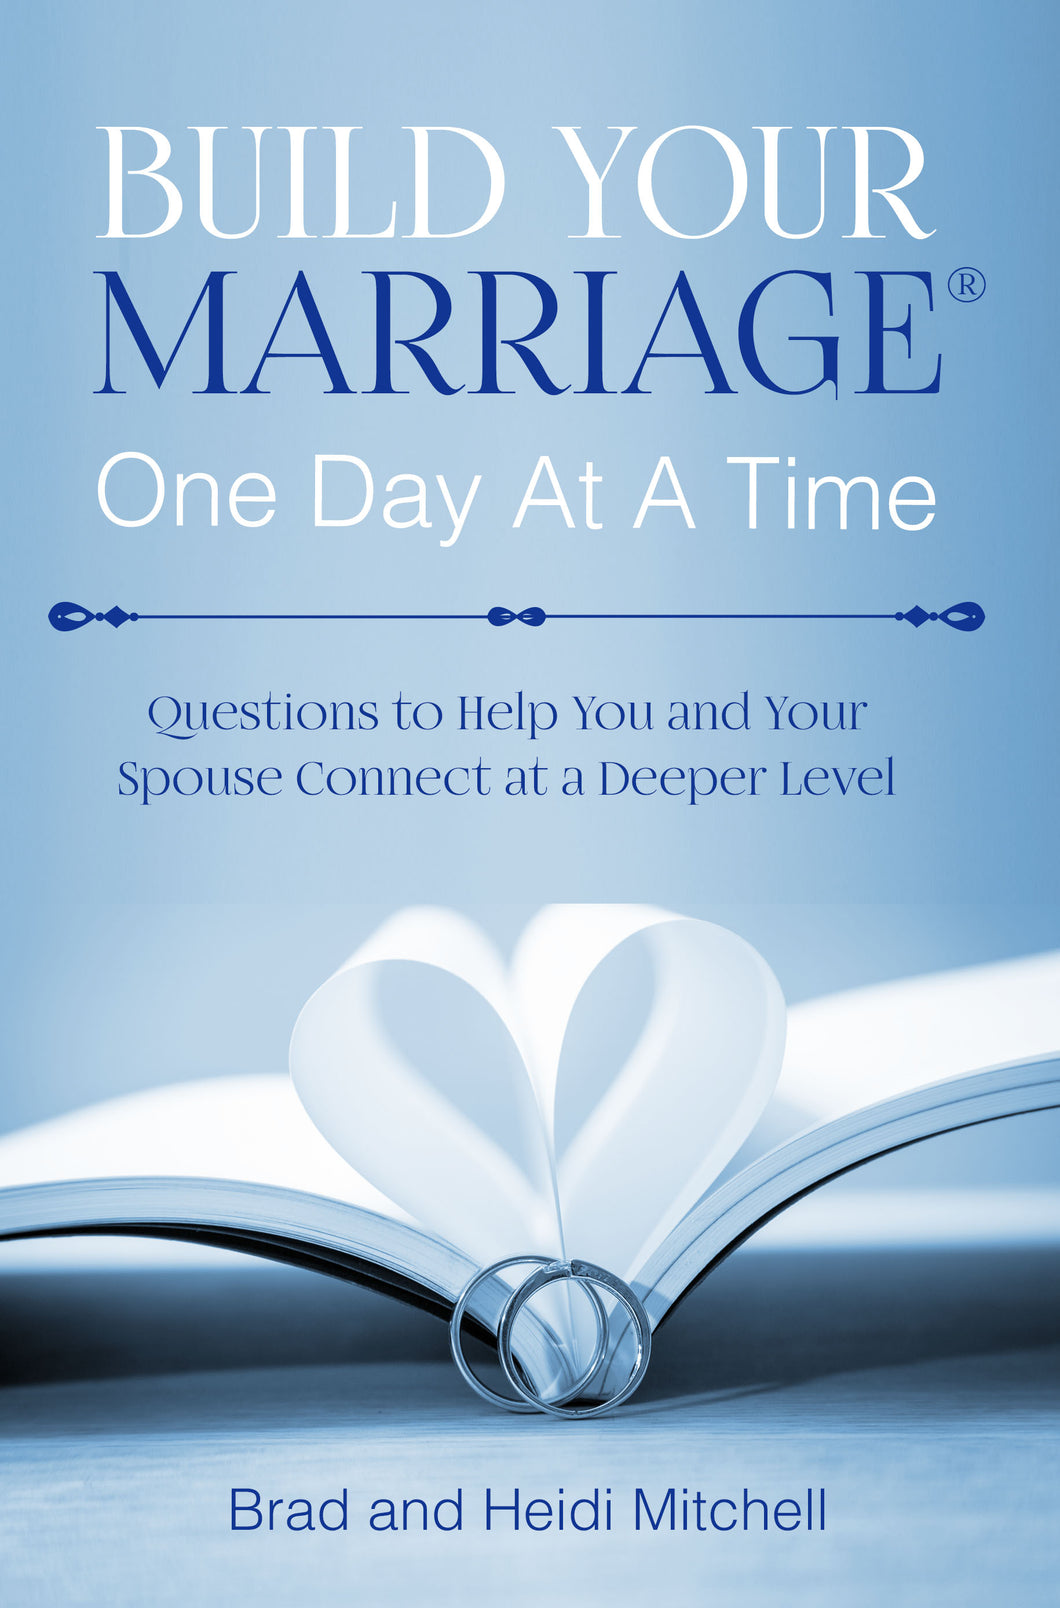 BYM-Build Your Marriage One Day at a Time - Questions to Help You and Your Spouse Connect at a Deeper Level